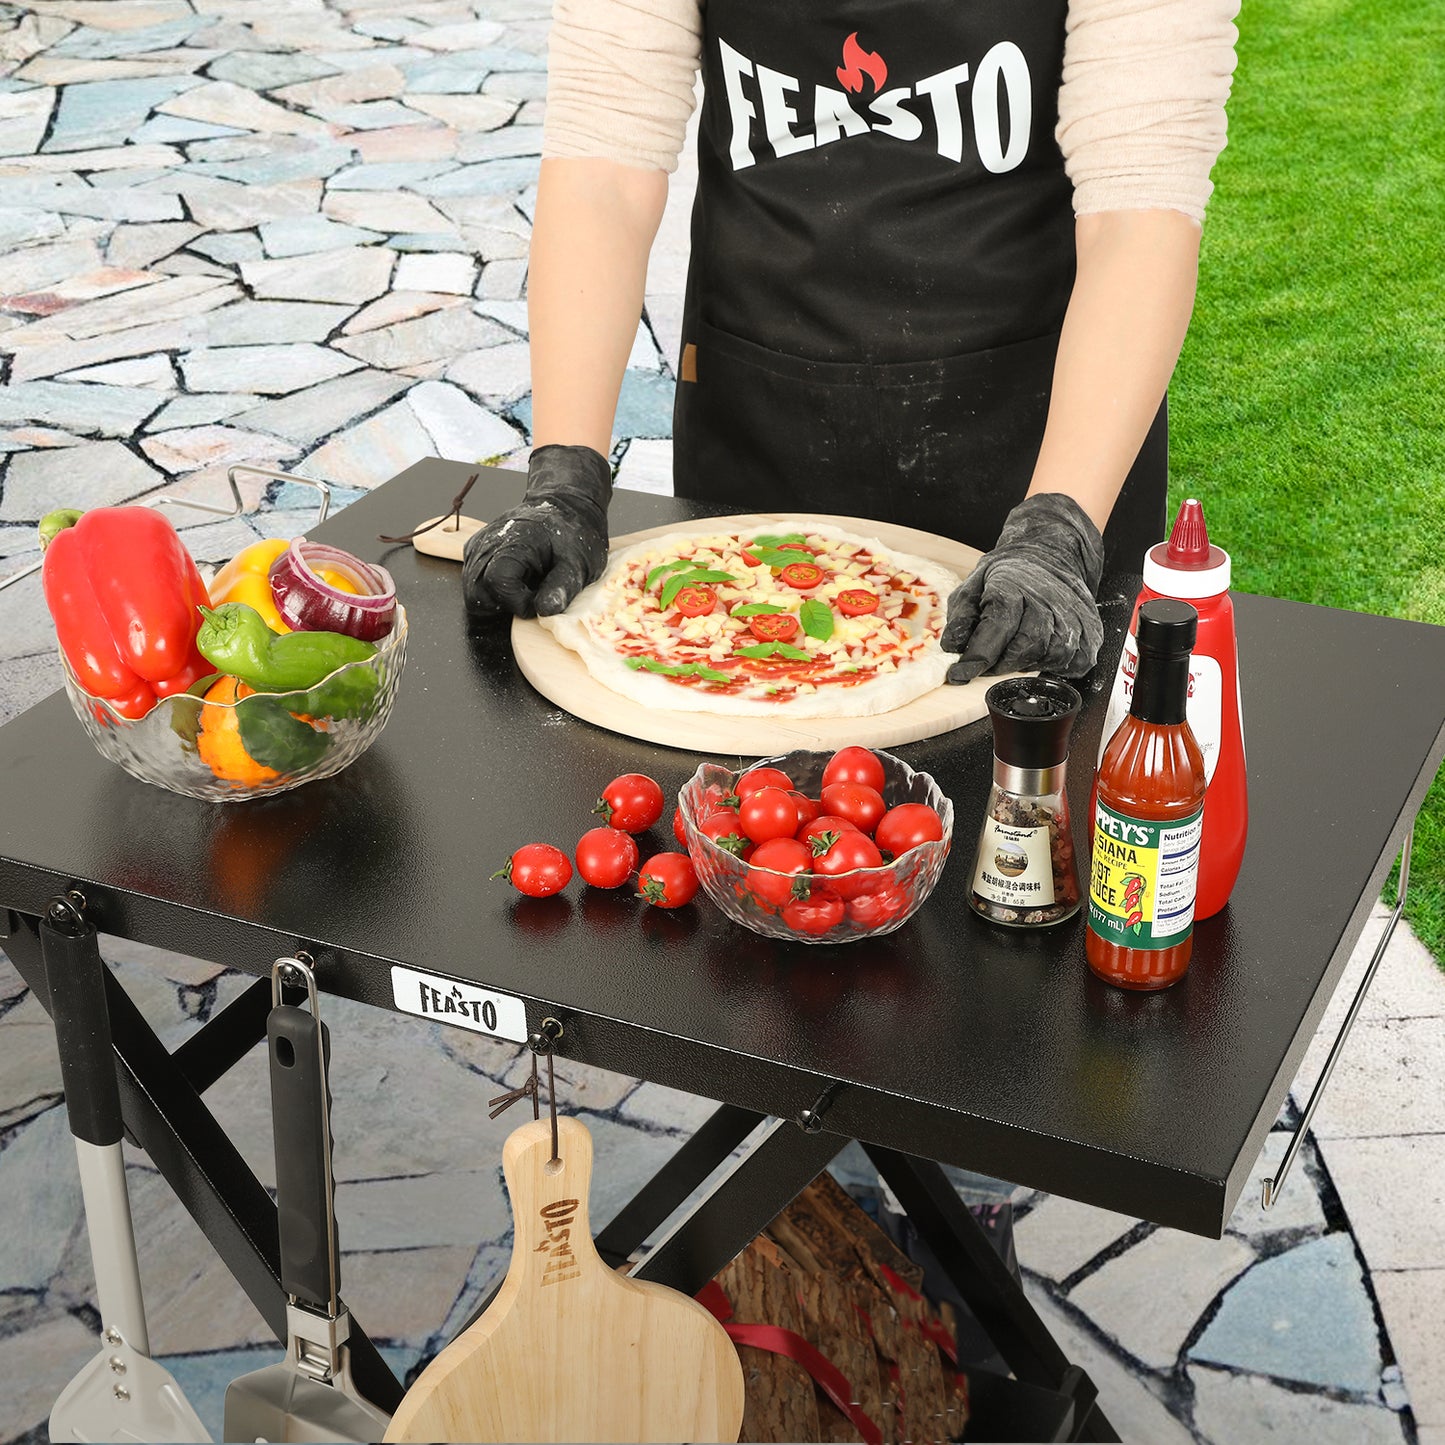 Feasto Large Folding Table Foldable Grill Stand and Pizza Oven Stand Portable Outdoor Food Prep Table Friendly to Storage Ideal for Camp or RV Black